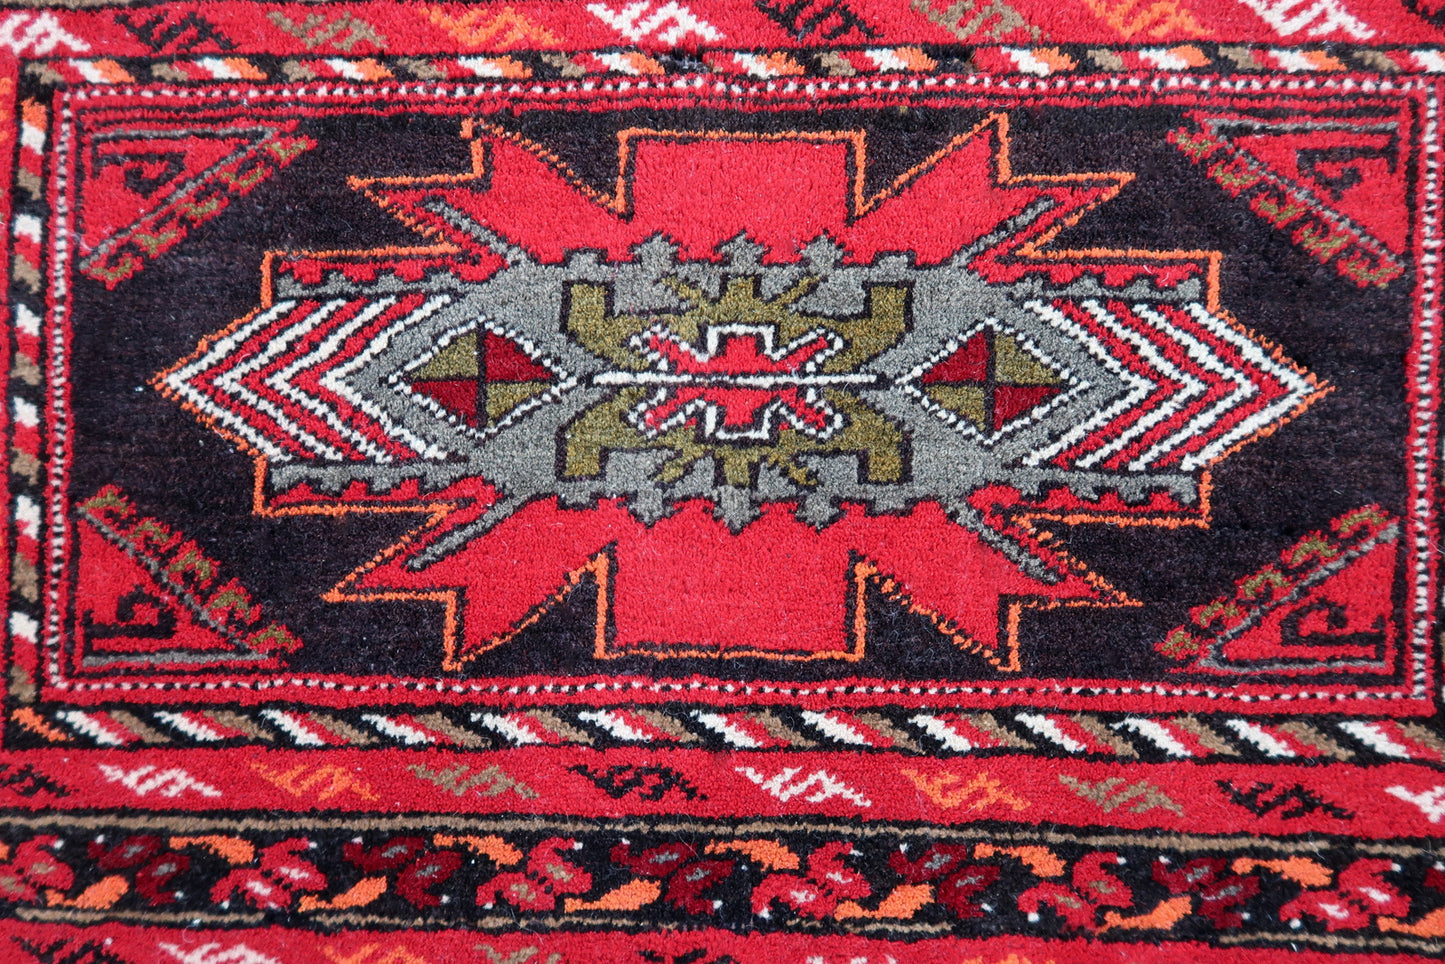 Handmade vintage Middle Eastern salt bag in bright colors. The rug is from the end of 20th century in original good condition. The size including kilim is 1.6' x 2.5' (50cm x 80cm). The bag is opened up, we can stitch it back by request.